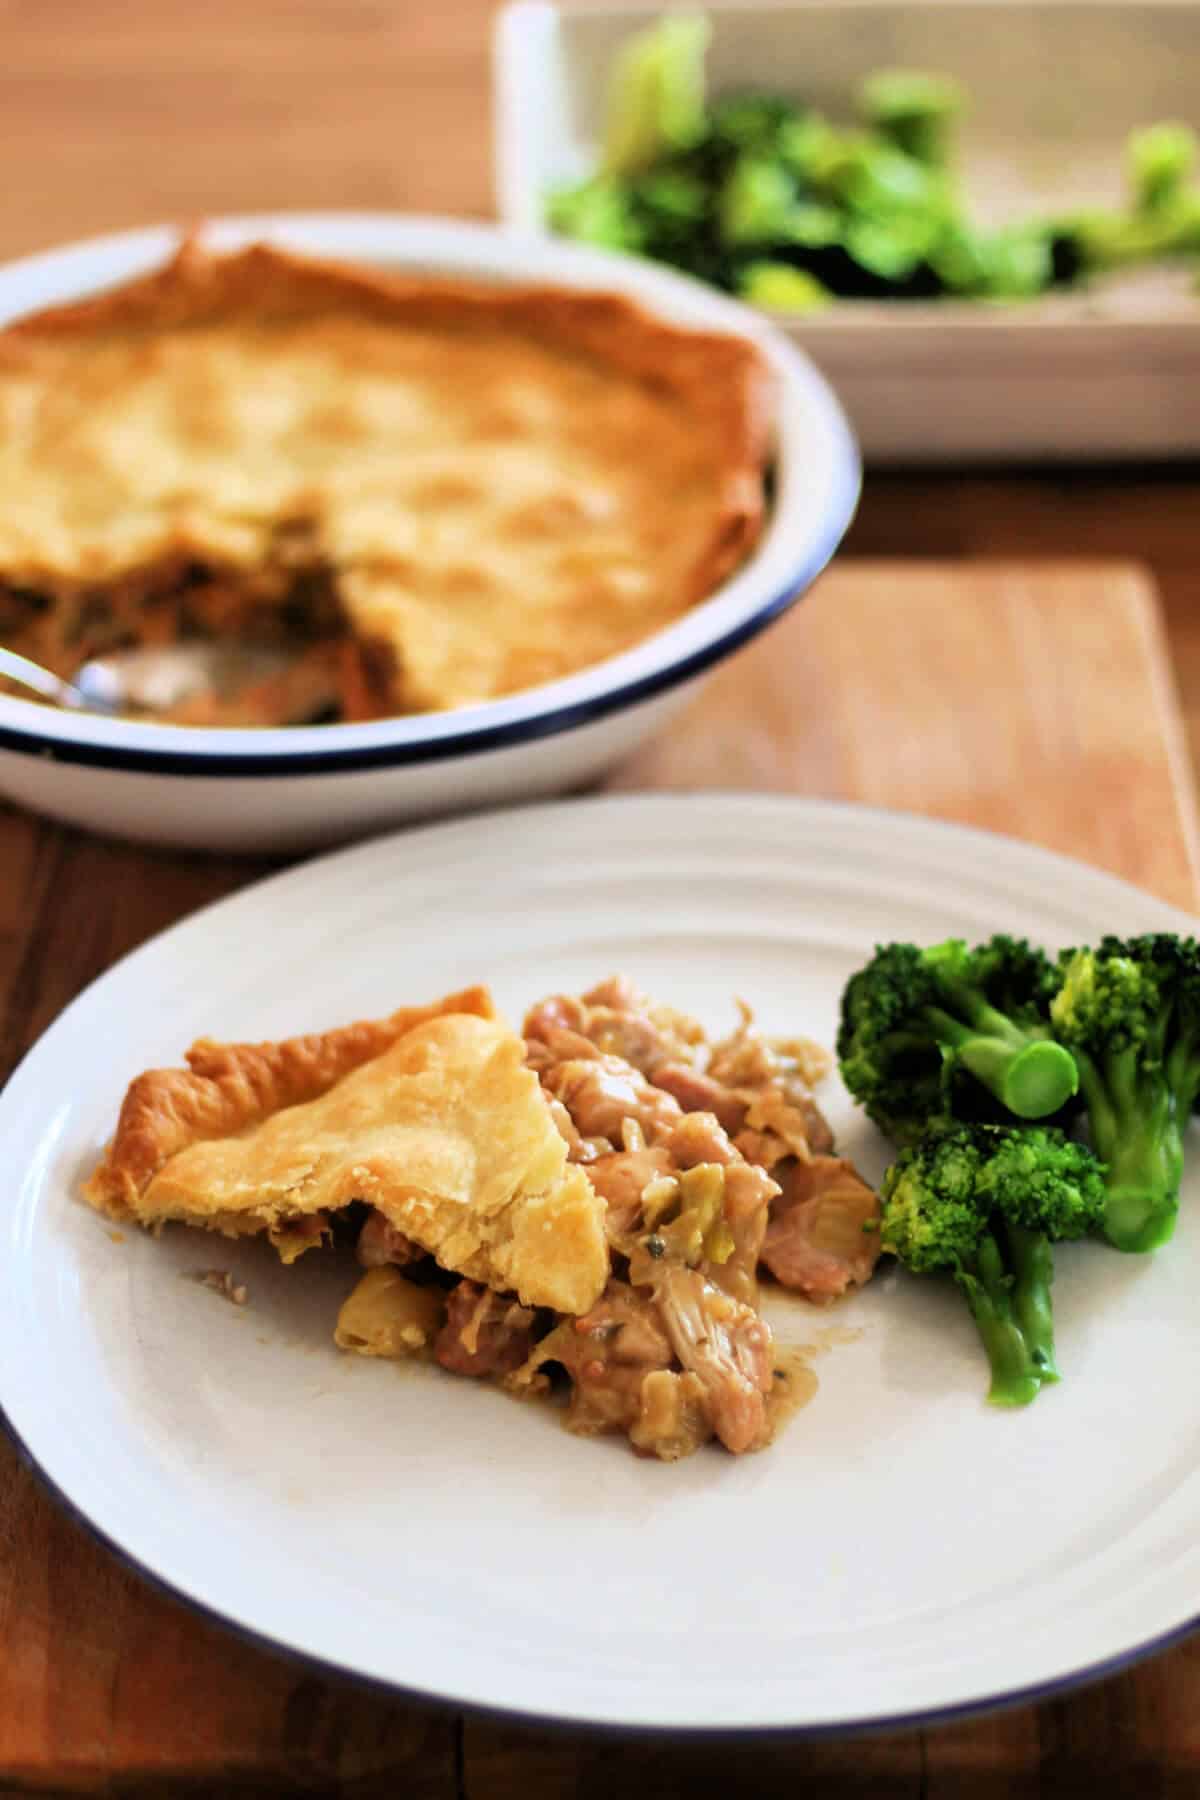 Chicken pie served on white plate, with broccoli, serving dish behind.